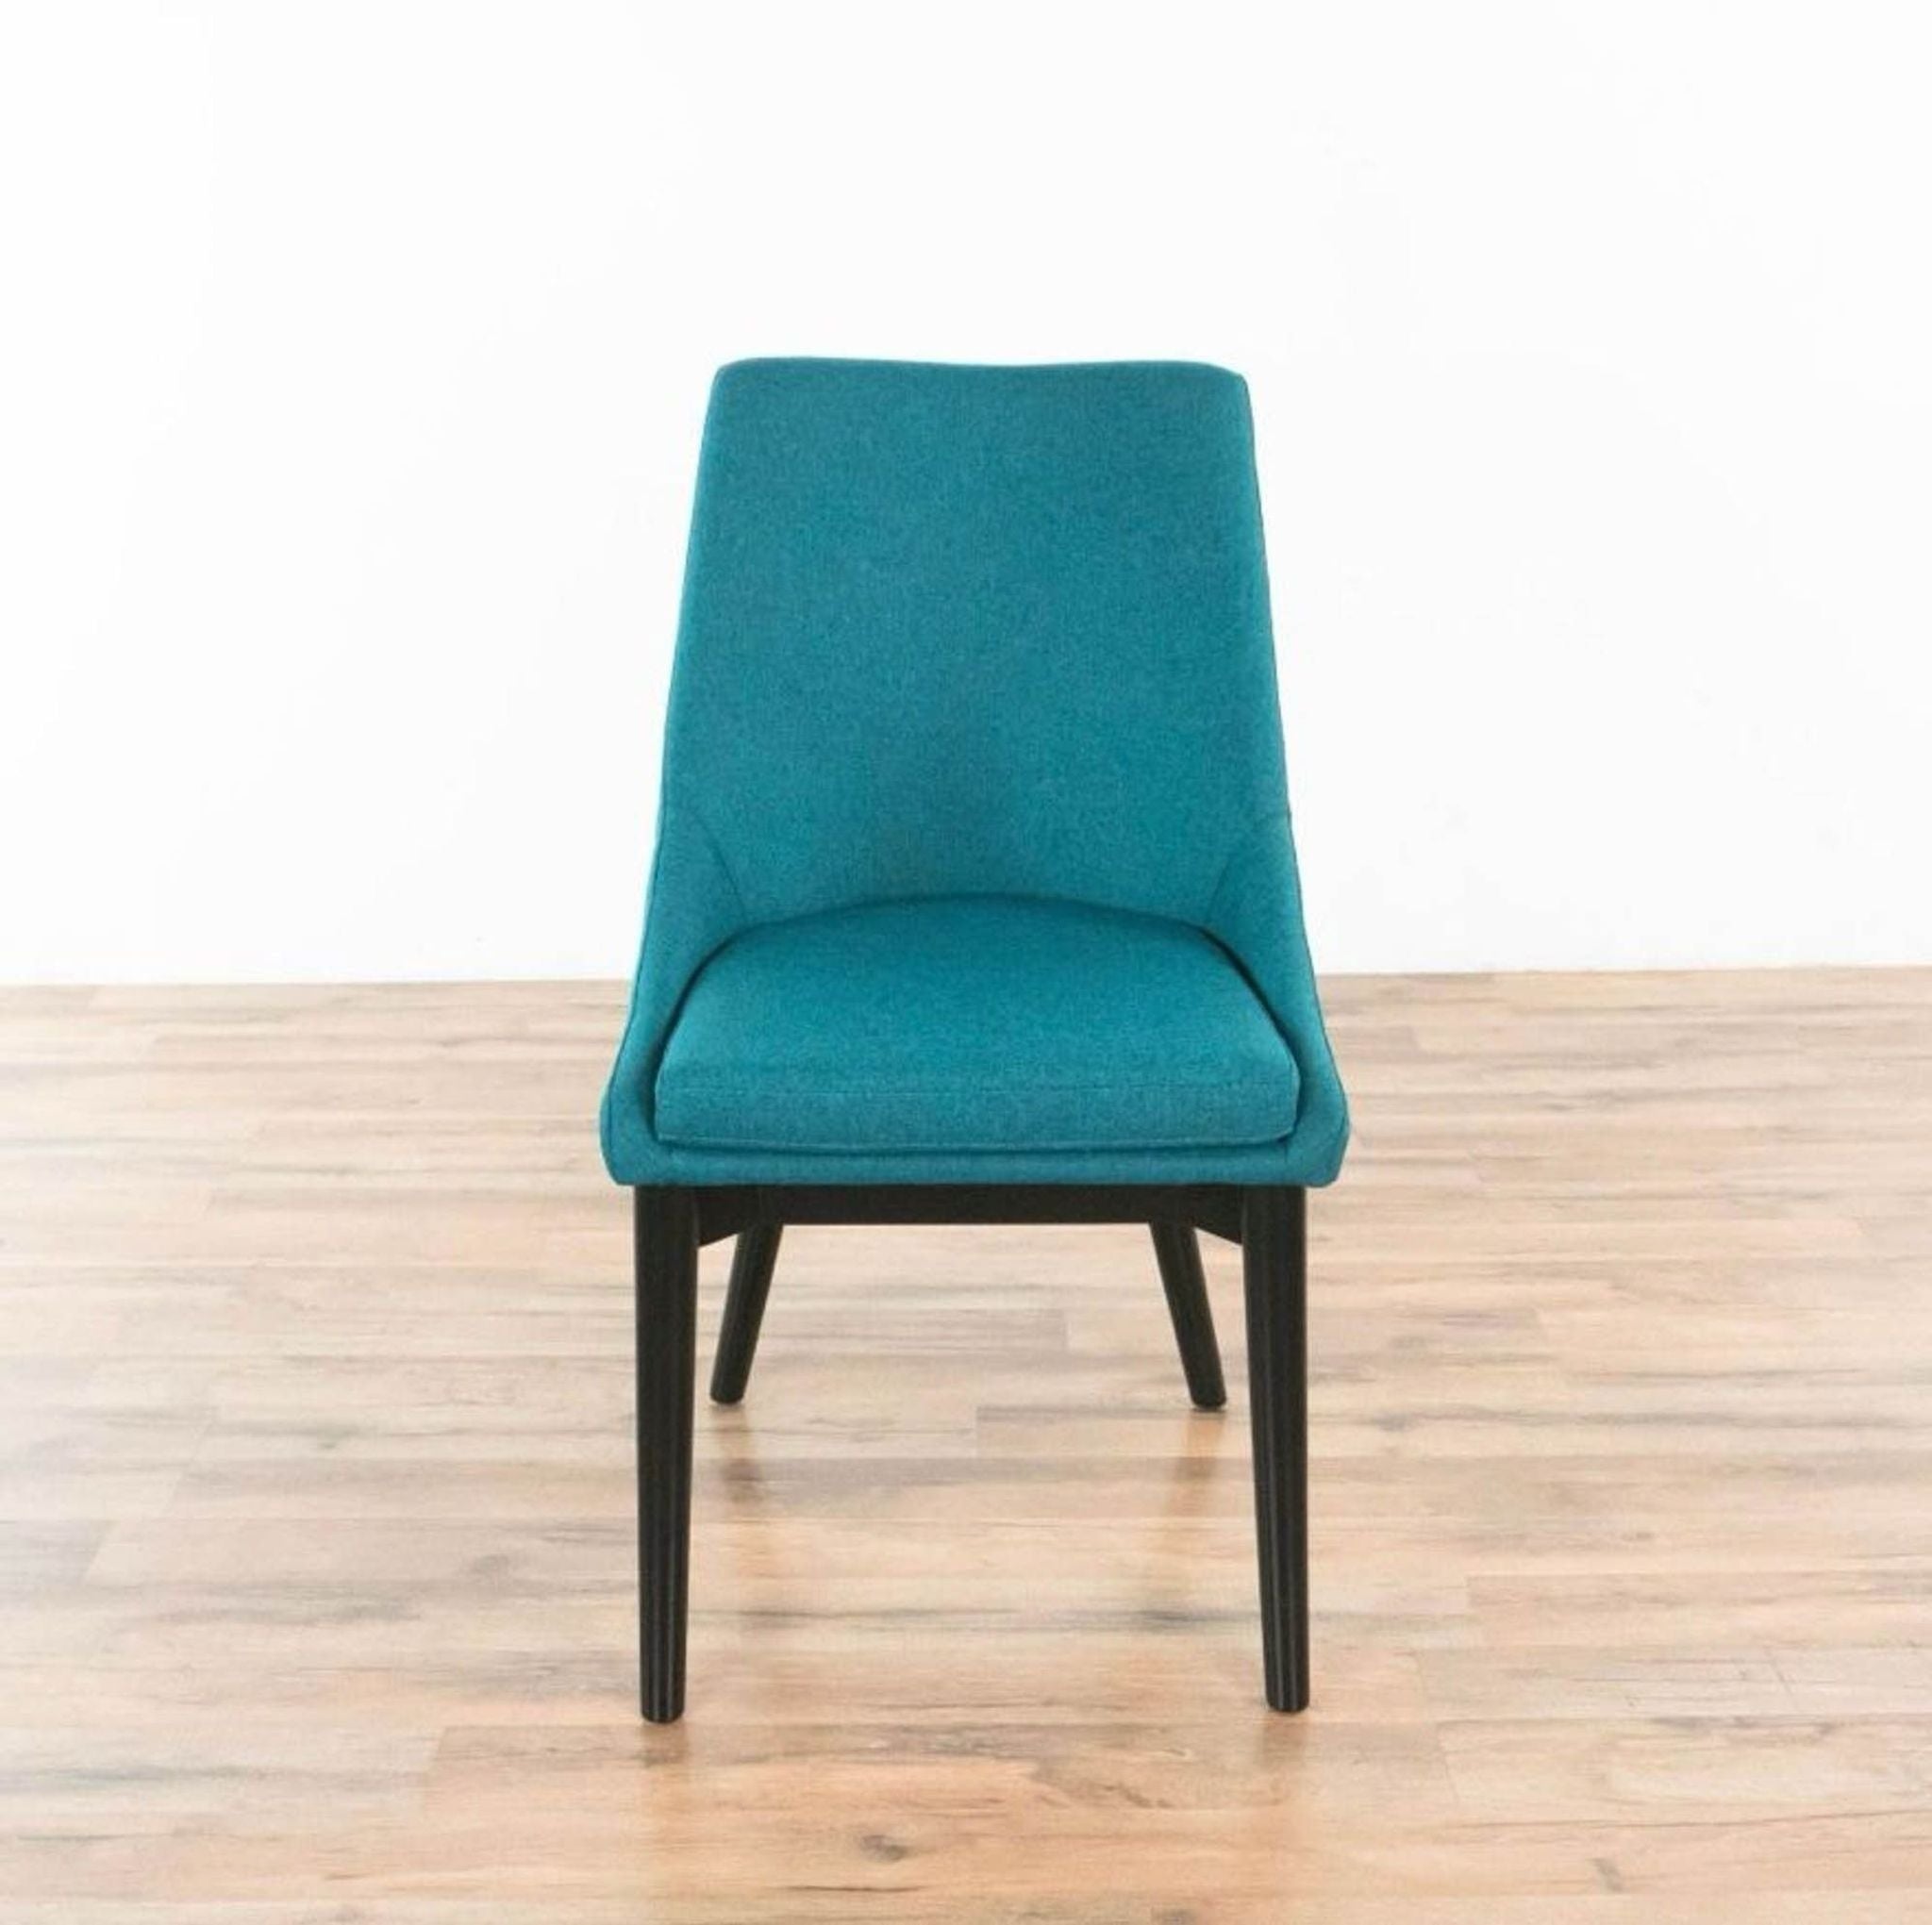 Front view of a teal StealMod Viscount side chair with dense foam padding and tapered black wood legs on a wooden floor.